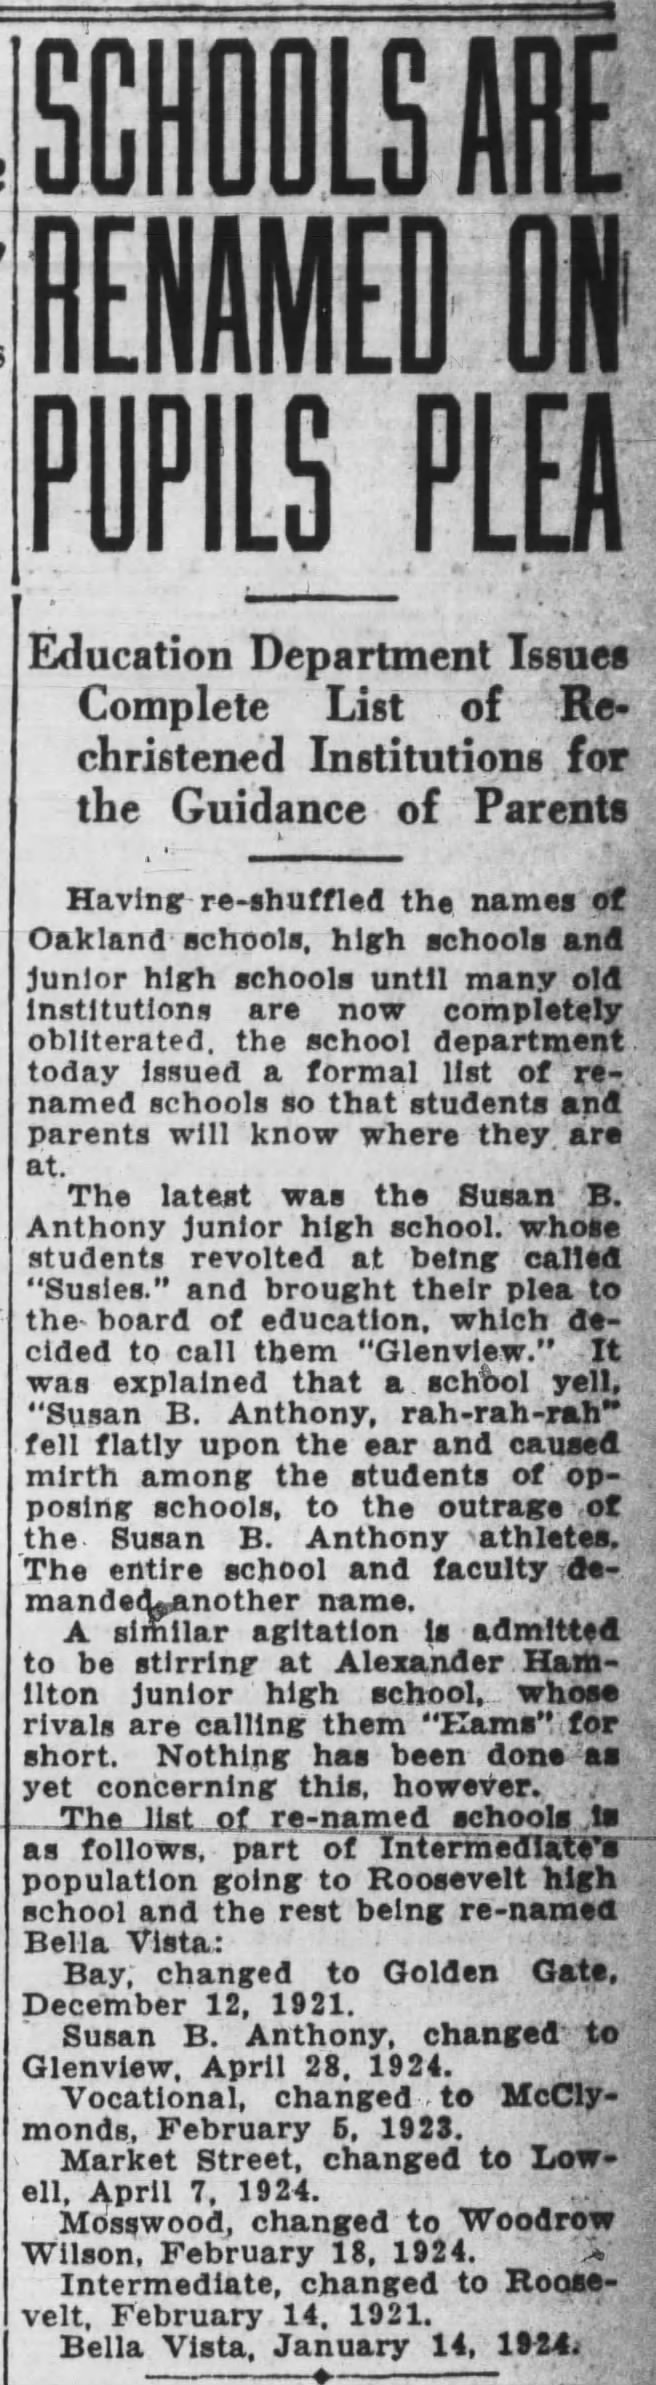 schools renamed -- Susan B. Anthony Jr. High becomes Glenview